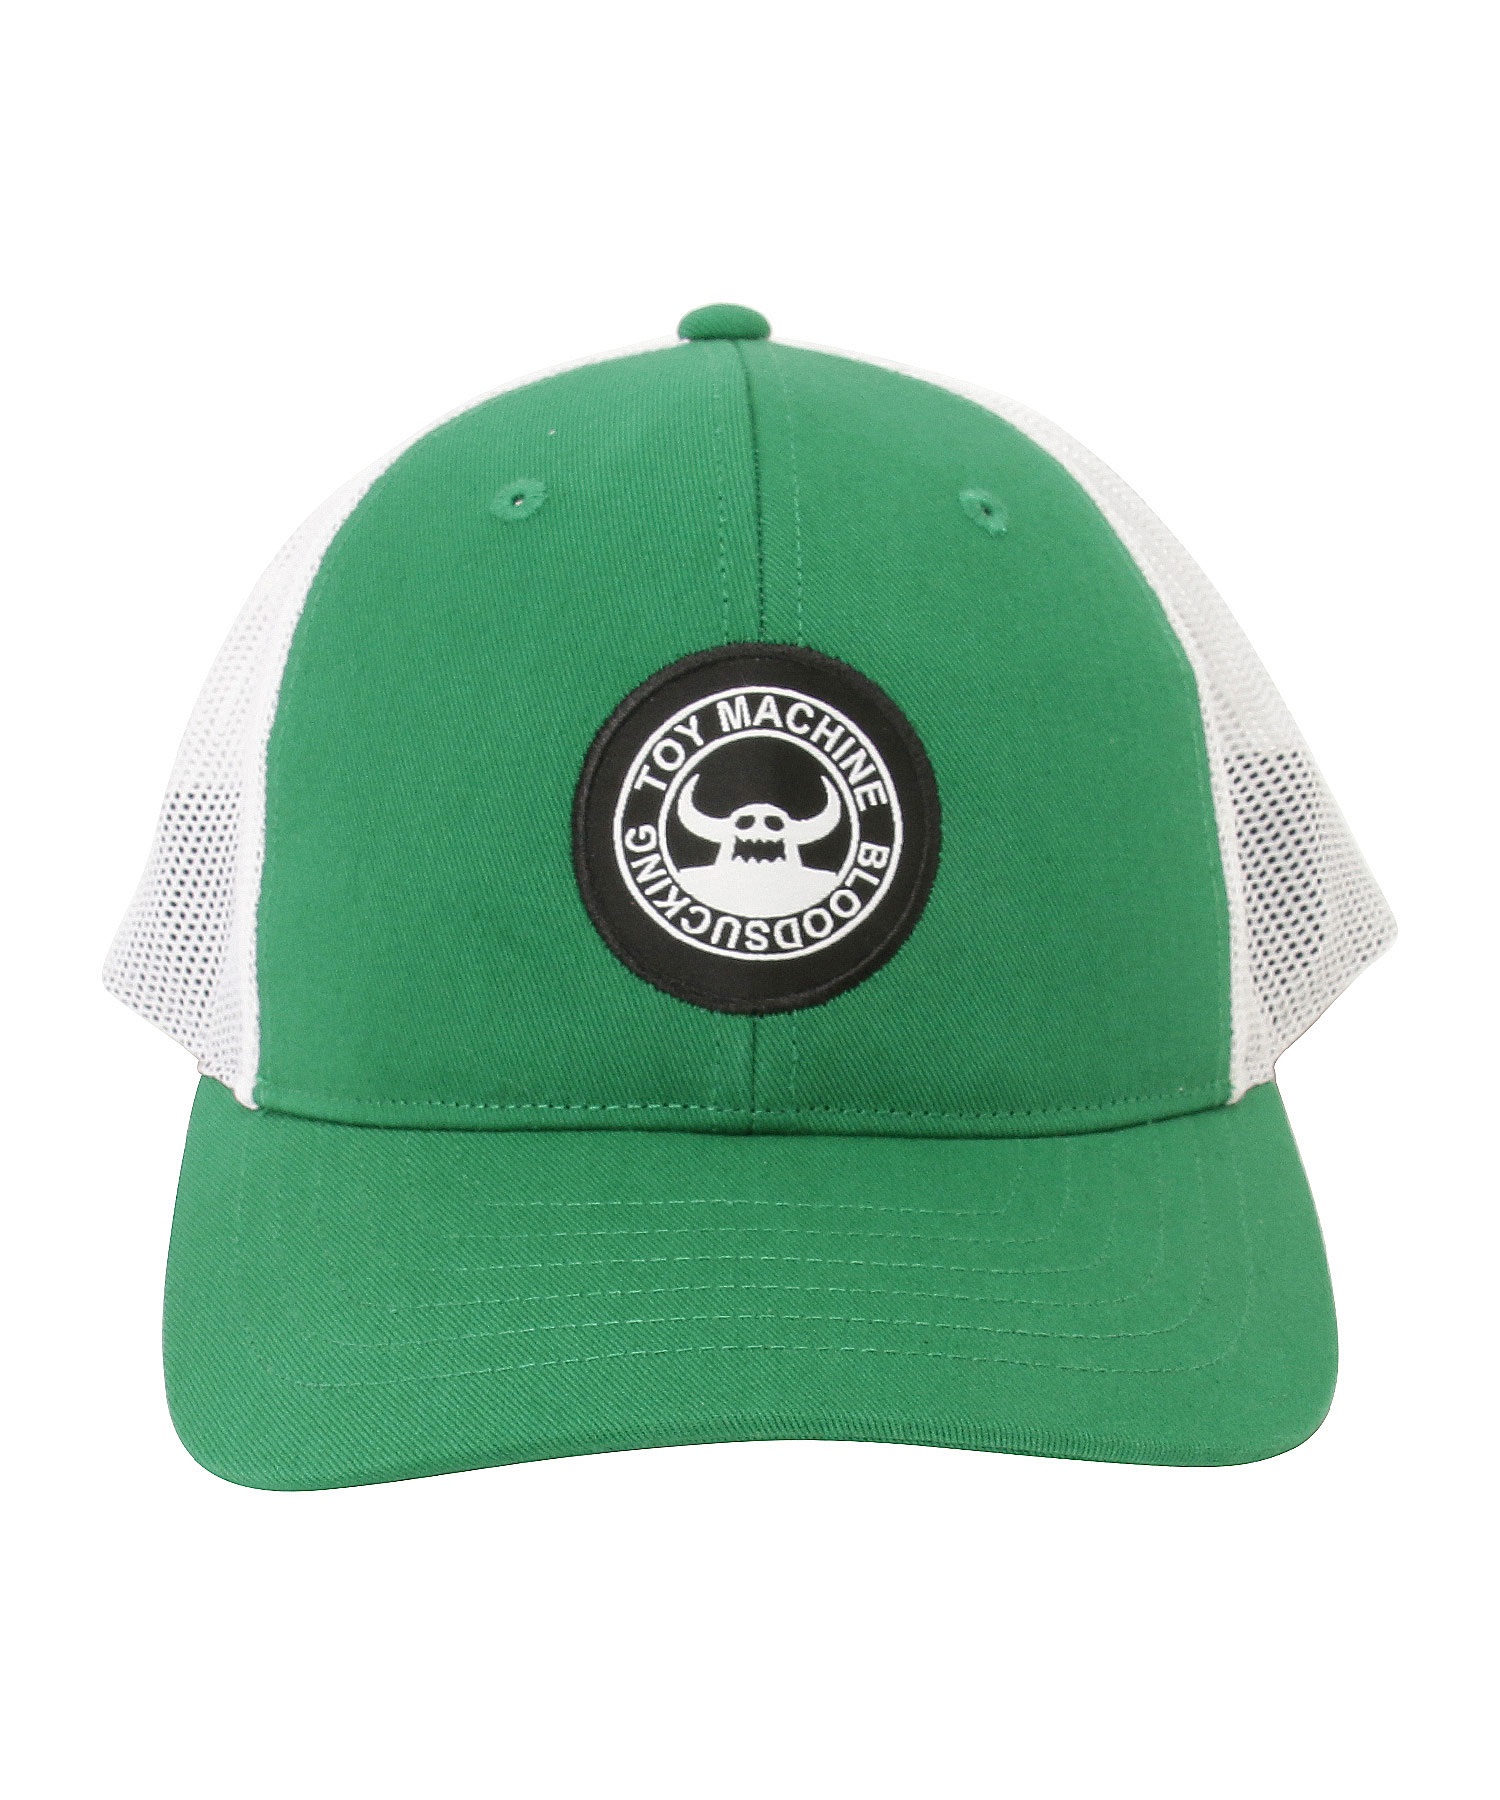 TOY MACHINE/トイマシーン キッズ キャップ TOY COTTON TWILL MESH CAP 232045002(RD-ONESIZE)